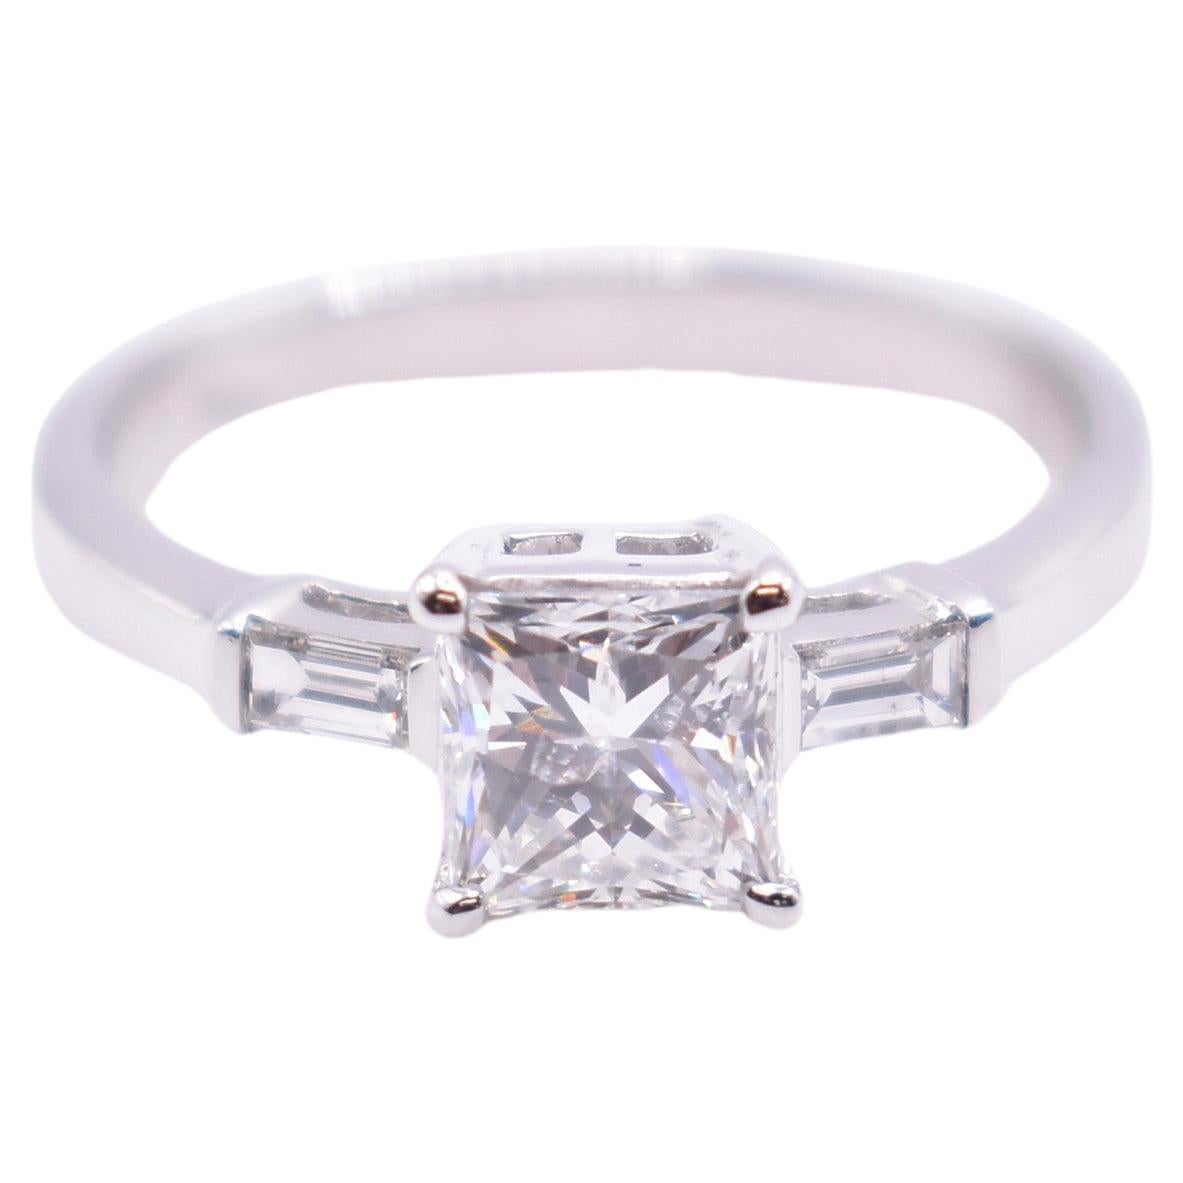  18ct White Gold 1ct Princess Cut Diamond Engagement Ring For Sale